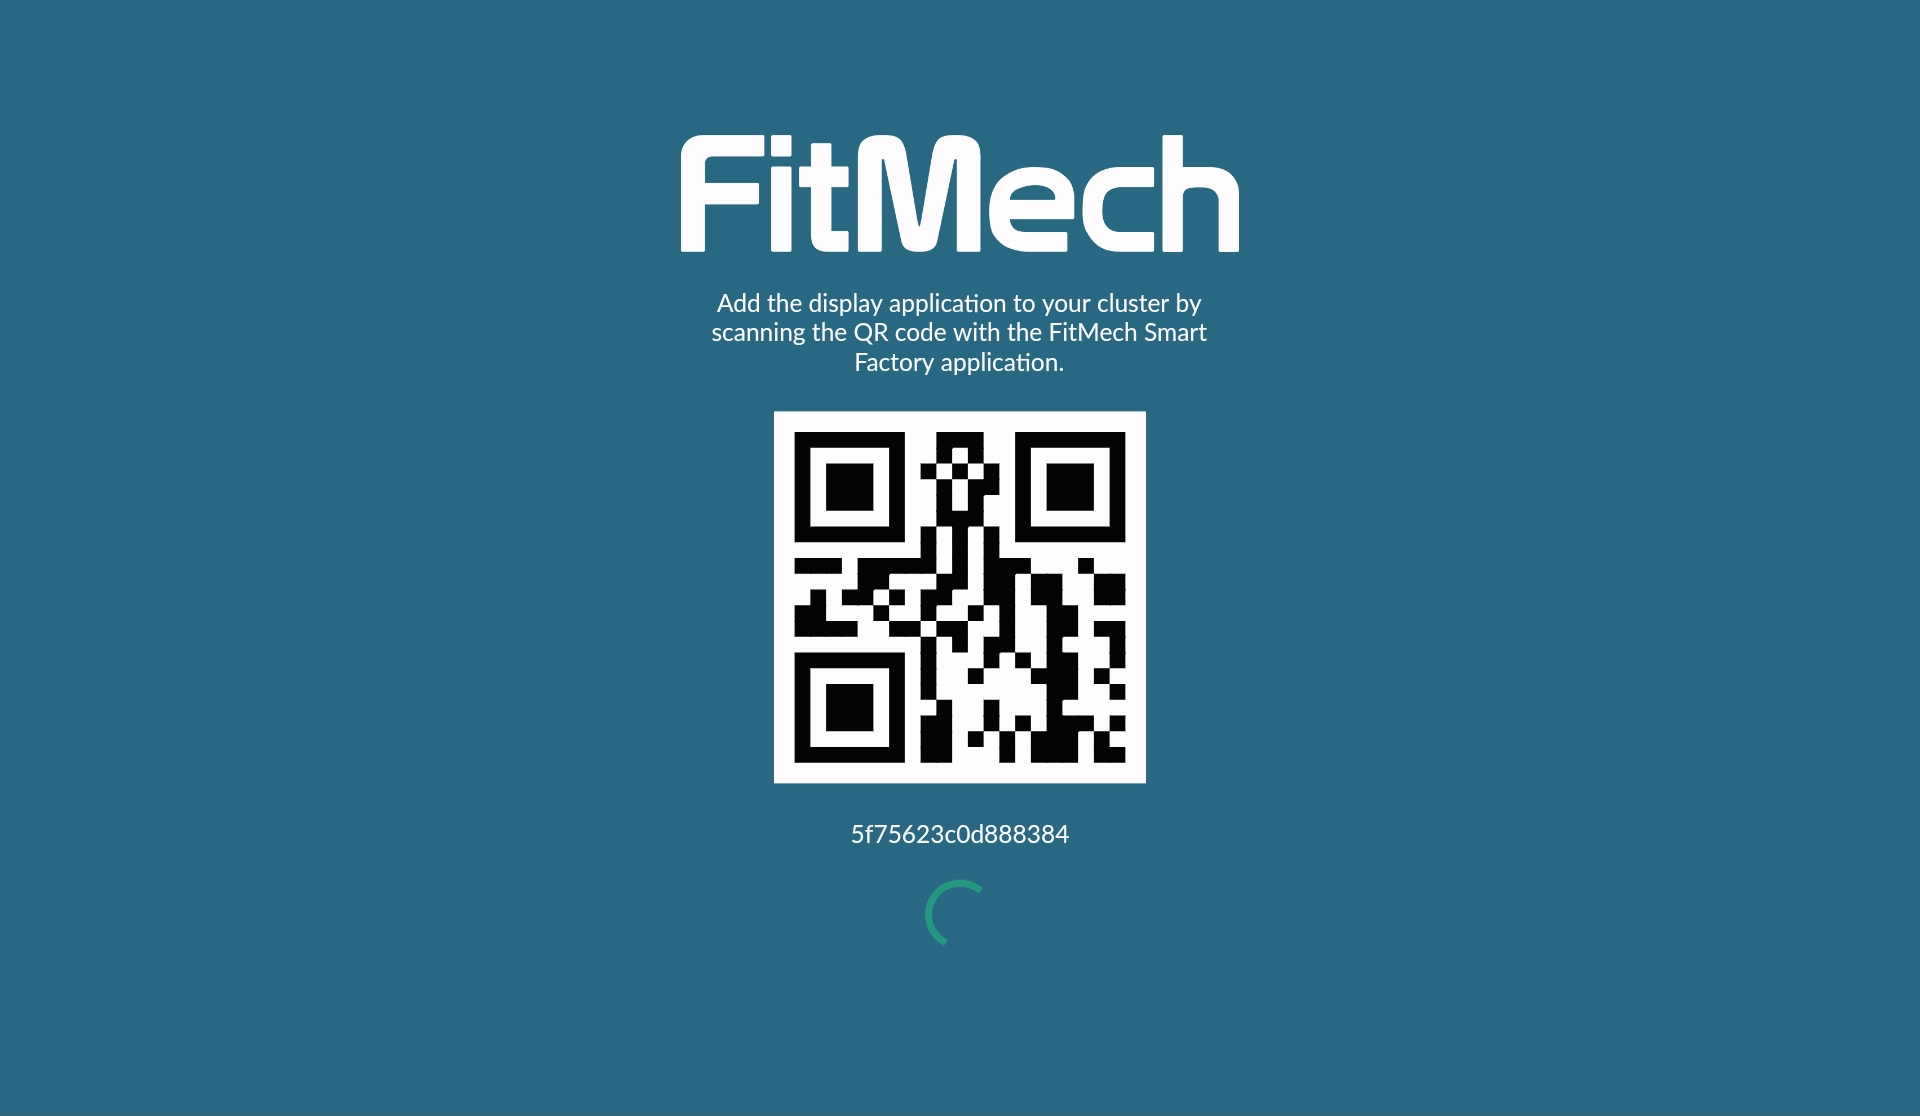 FitMech Display mobile application